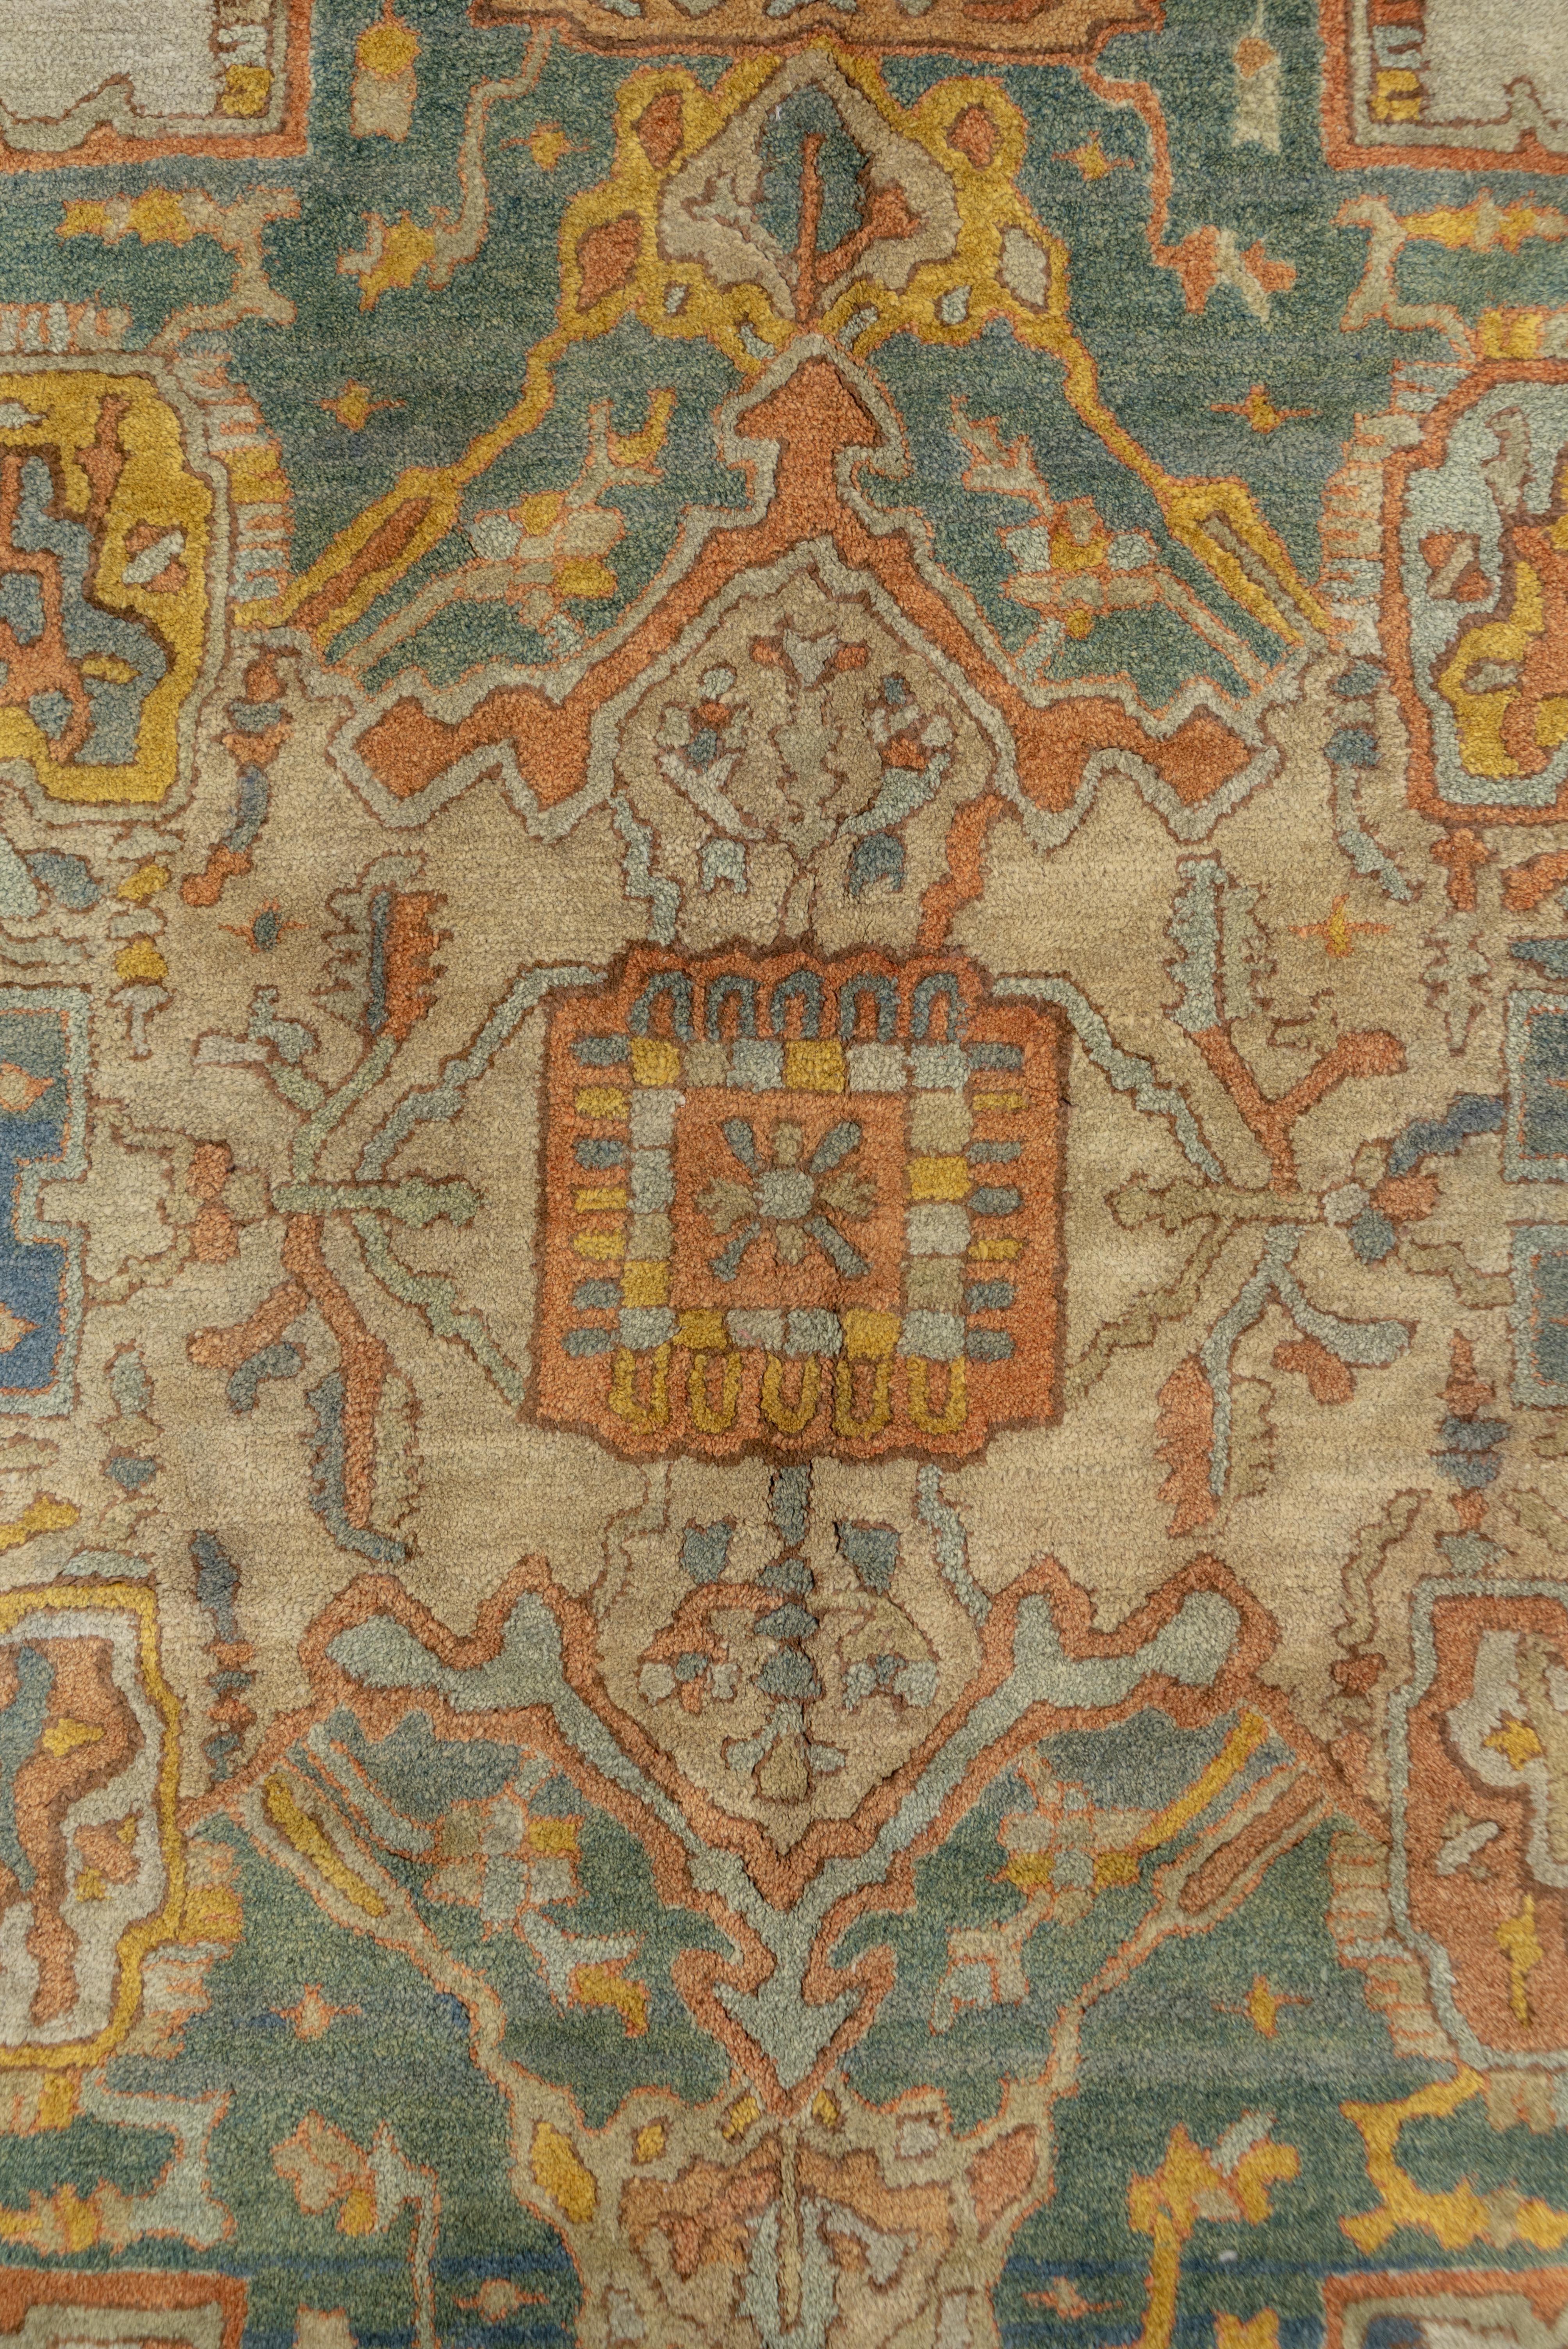 Hooked Rug in Ancient Orange with Elaborate Central Medallion In Good Condition For Sale In New York, NY